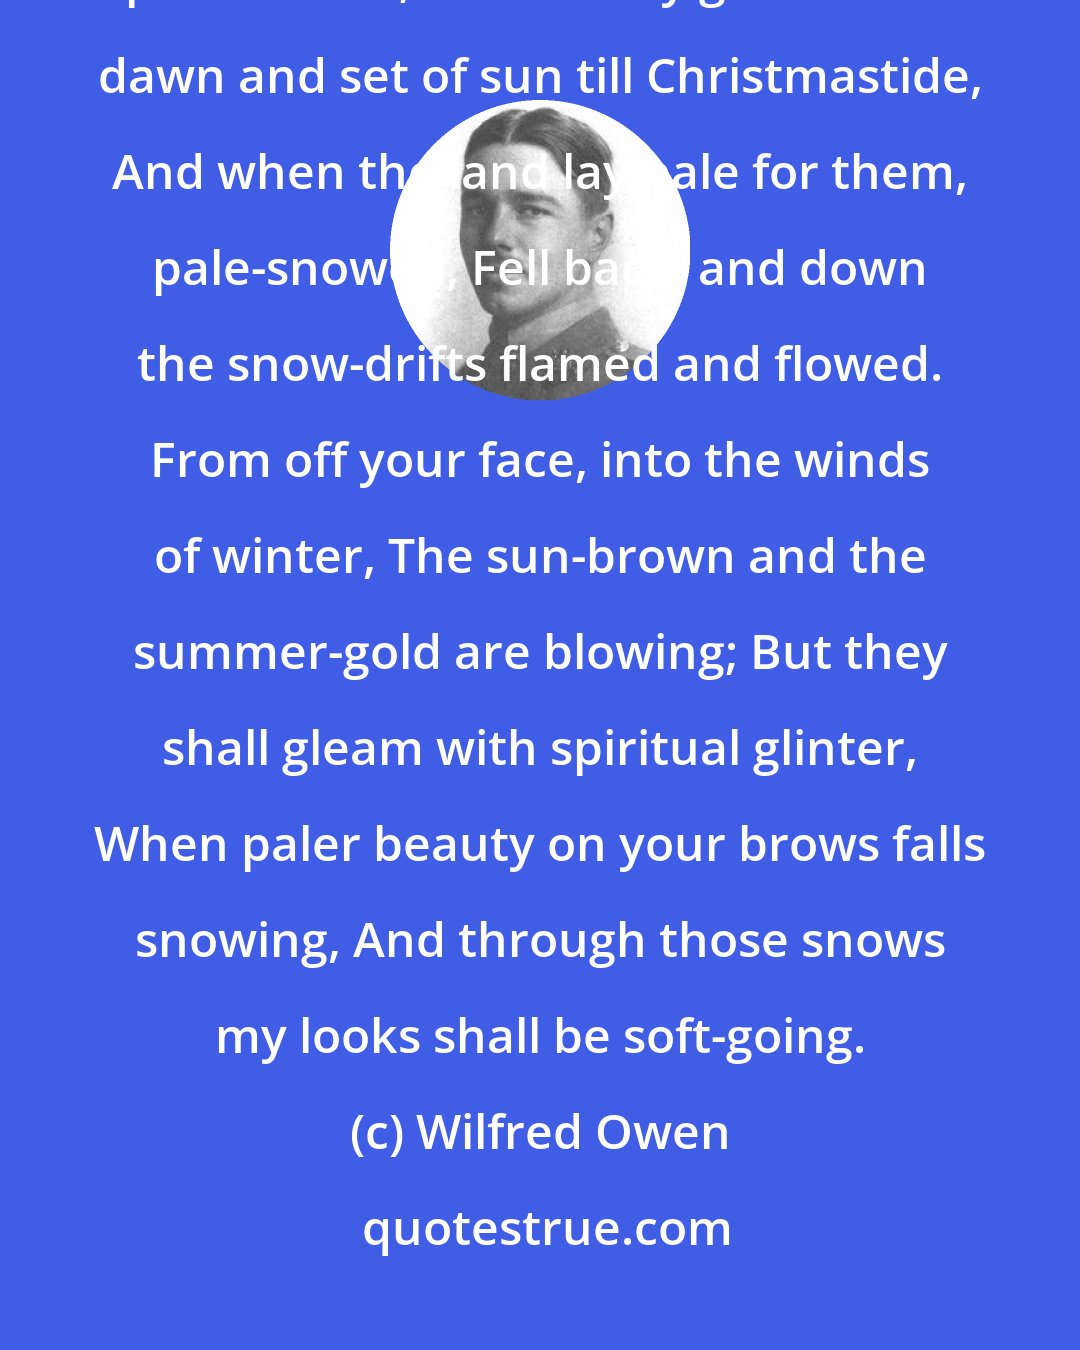 Wilfred Owen: Winter Song The browns, the olives, and the yellows died, And were swept up to heaven; where they glowed Each dawn and set of sun till Christmastide, And when the land lay pale for them, pale-snowed, Fell back, and down the snow-drifts flamed and flowed. From off your face, into the winds of winter, The sun-brown and the summer-gold are blowing; But they shall gleam with spiritual glinter, When paler beauty on your brows falls snowing, And through those snows my looks shall be soft-going.